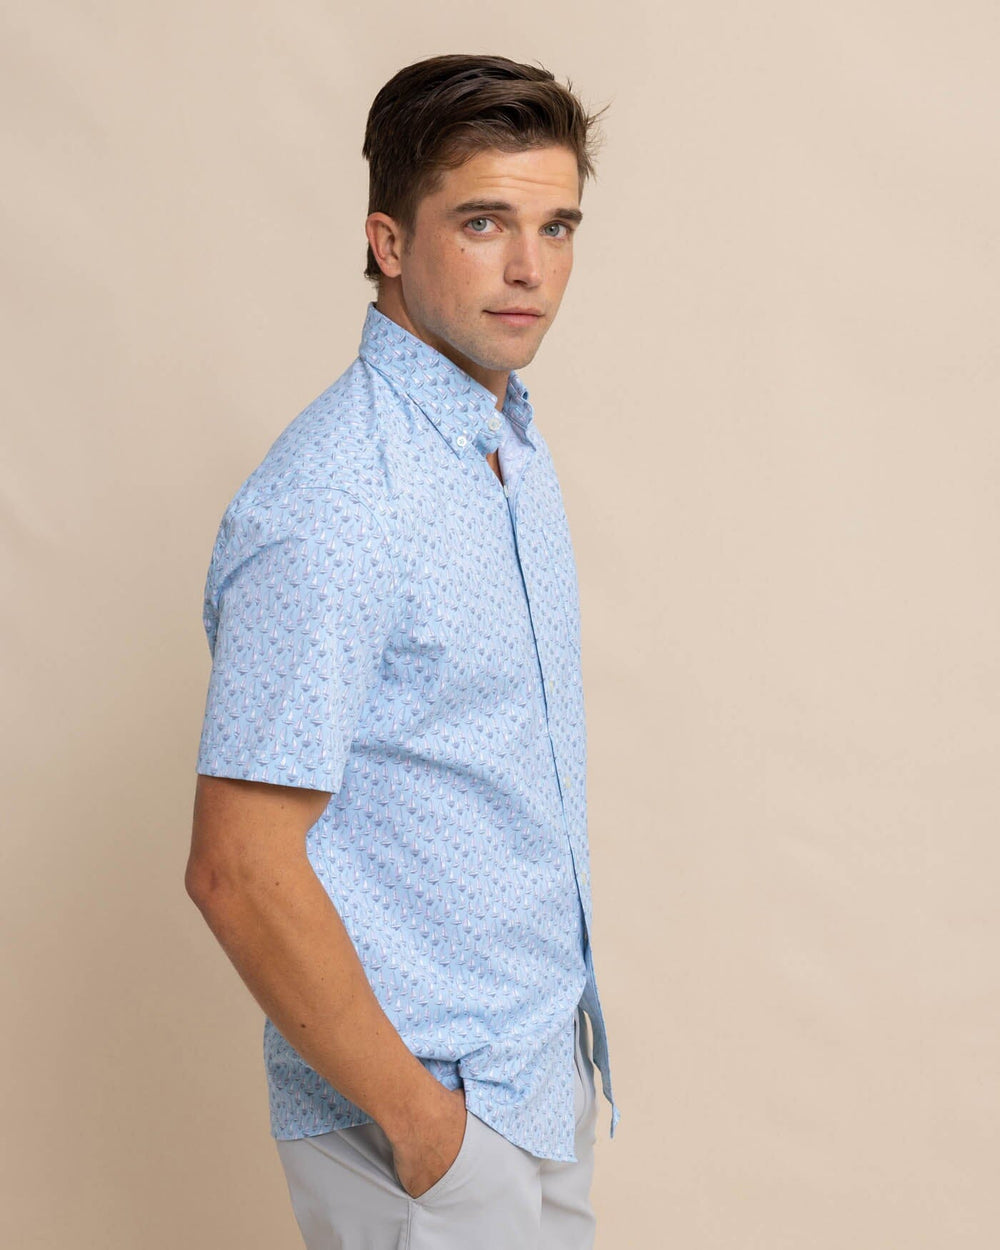 The front view of the Southern Tide Intercoastal Forget A-Boat It Short Sleeve SportShirt by Southern Tide - Clearwater Blue